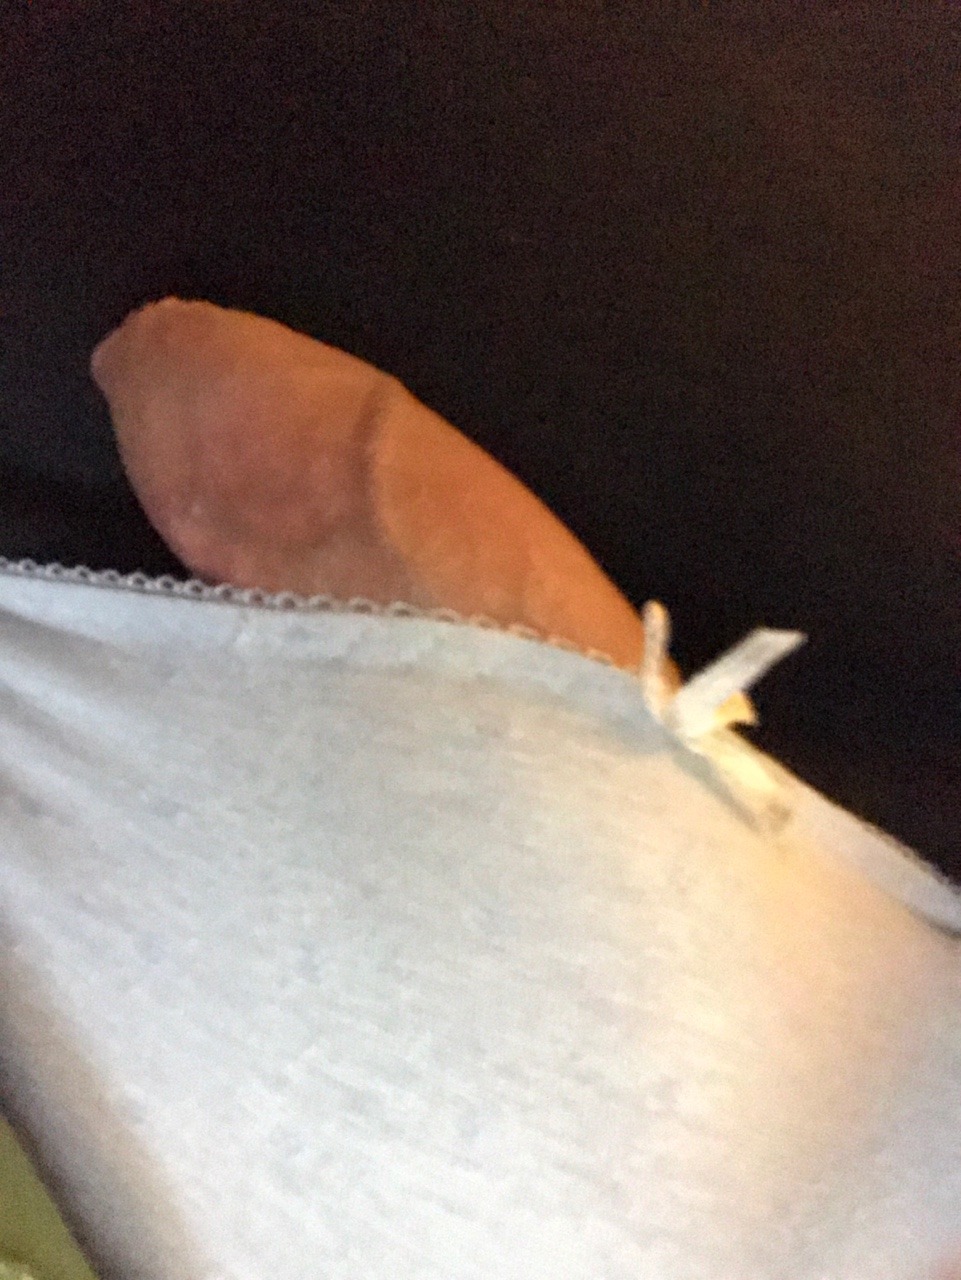 A few edges for lunch, then back in the panties and back to work we go🙈🙈🍆